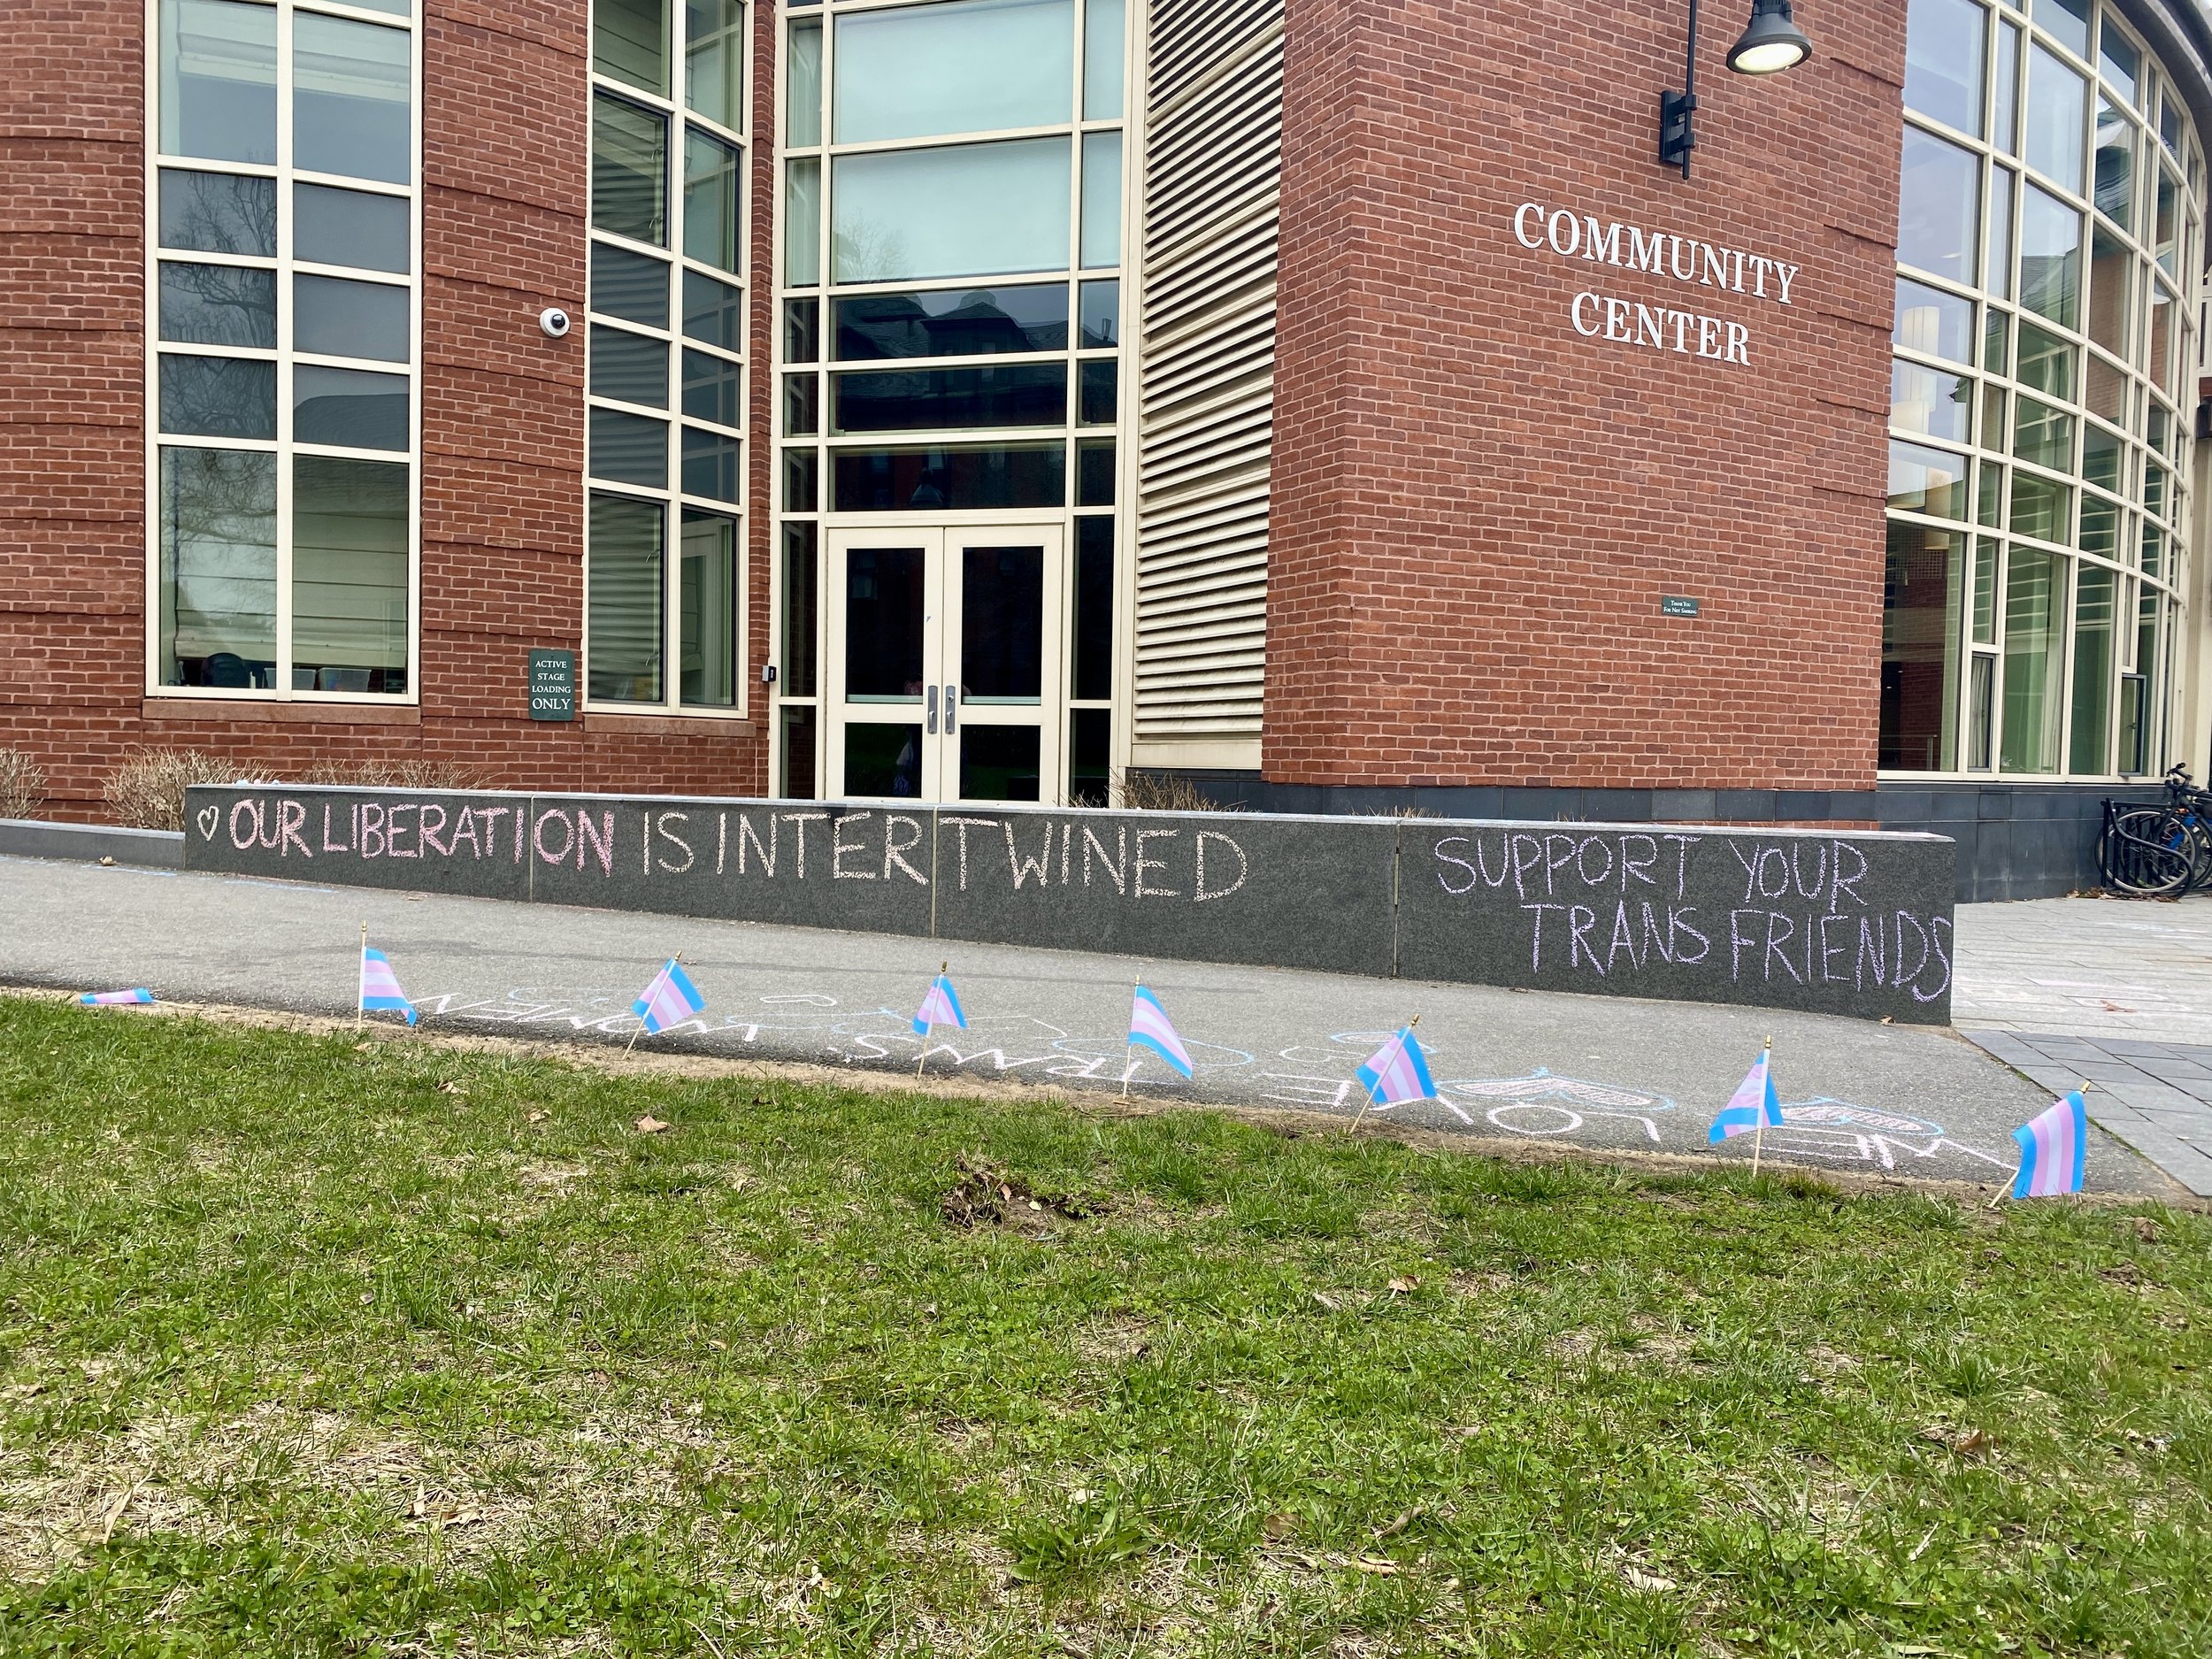 Transphobic messages found in Blanchard Hall on Trans Day of Visibility 